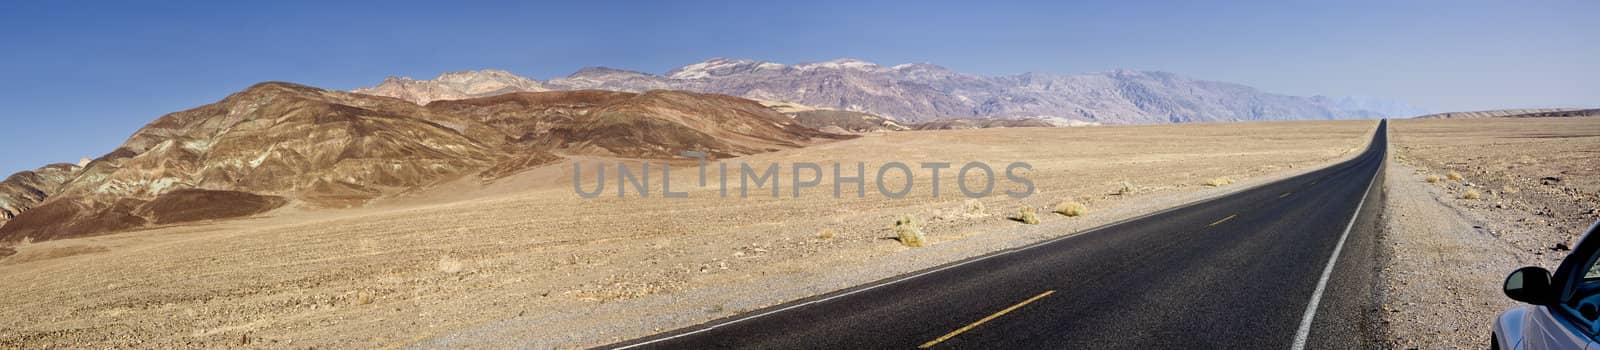 Car on the side of a road in California, United States. Panoramic shot.